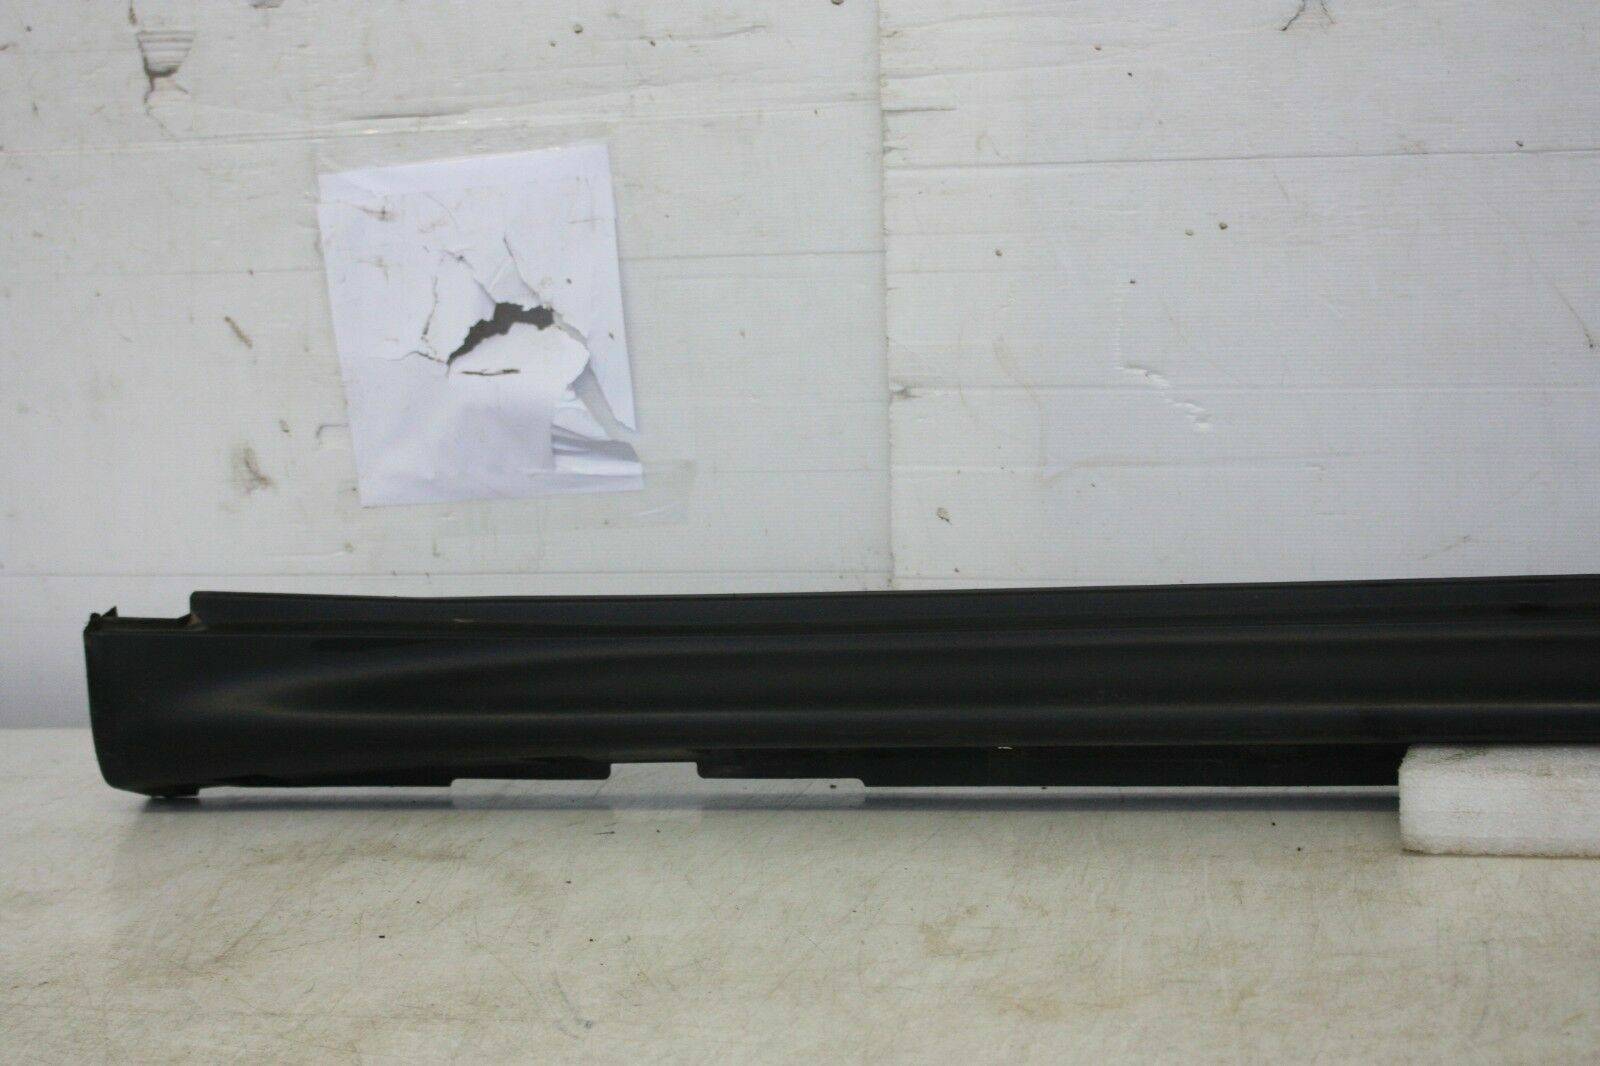 NISSAN-JUKE-RIGHT-SIDE-SKIRT-SILL-COVER-2010-TO-2014-175367545063-3